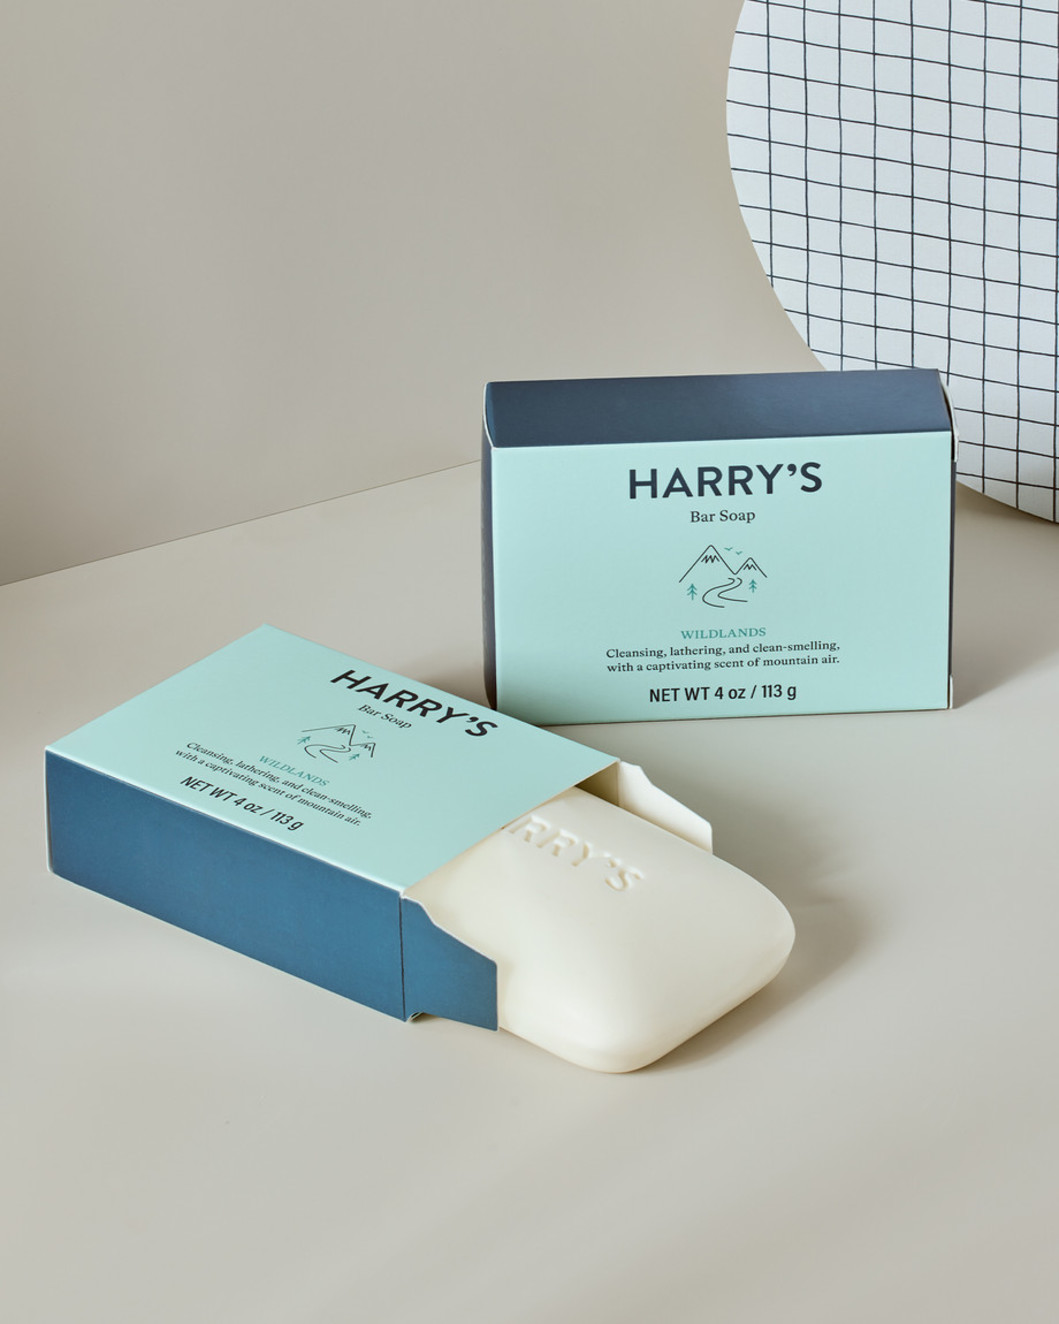 Here's what sets our Bar Soap apart 🧼 from Harry's - Desktop Email View